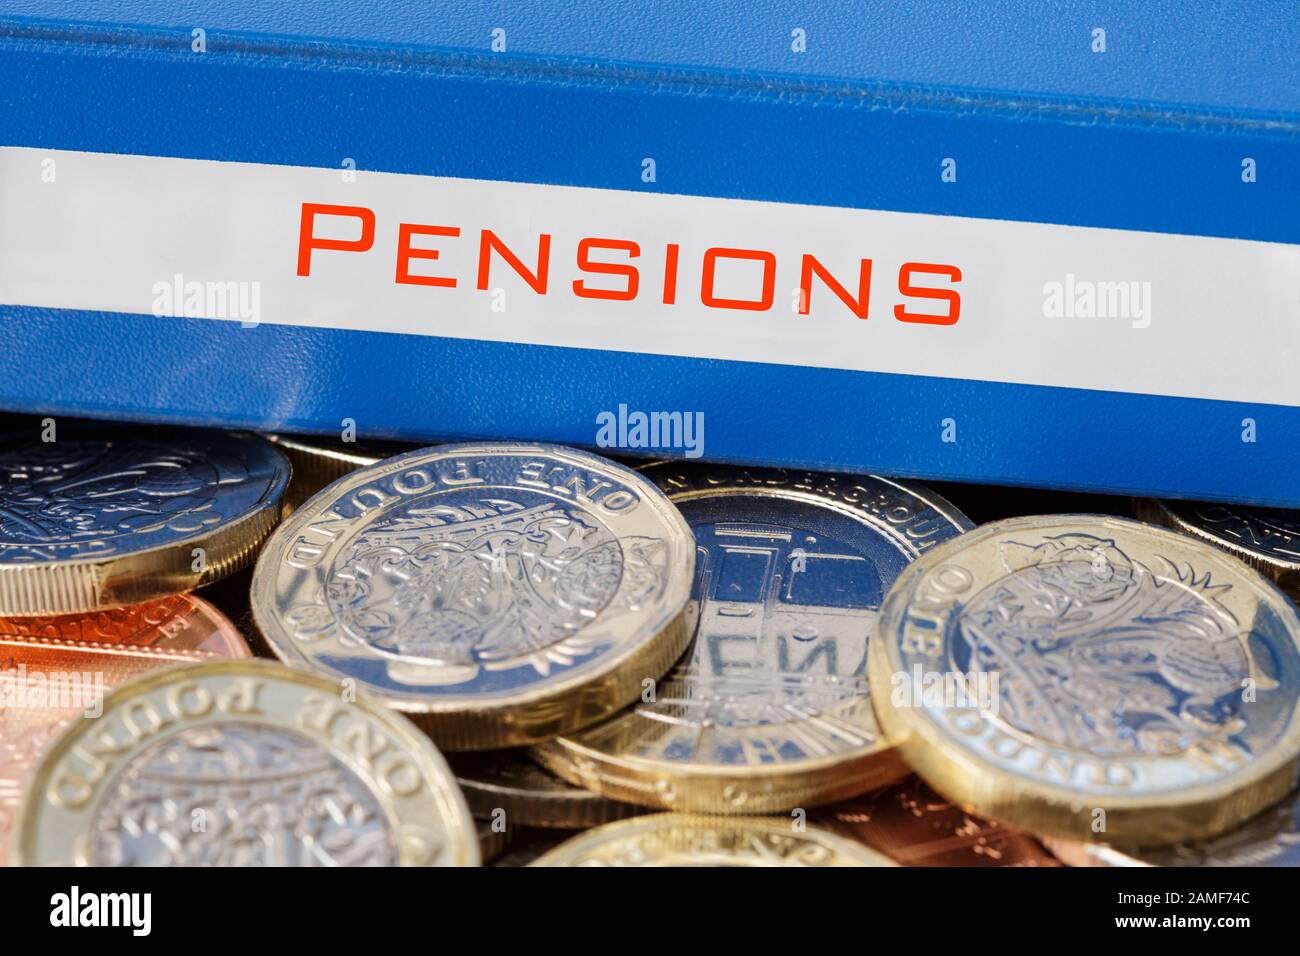 Pensions savings portfolio folder on a pile of pounds sterling money new £ pound coins. To illustrate saving for a pension concept. England UK Britain Stock Photo